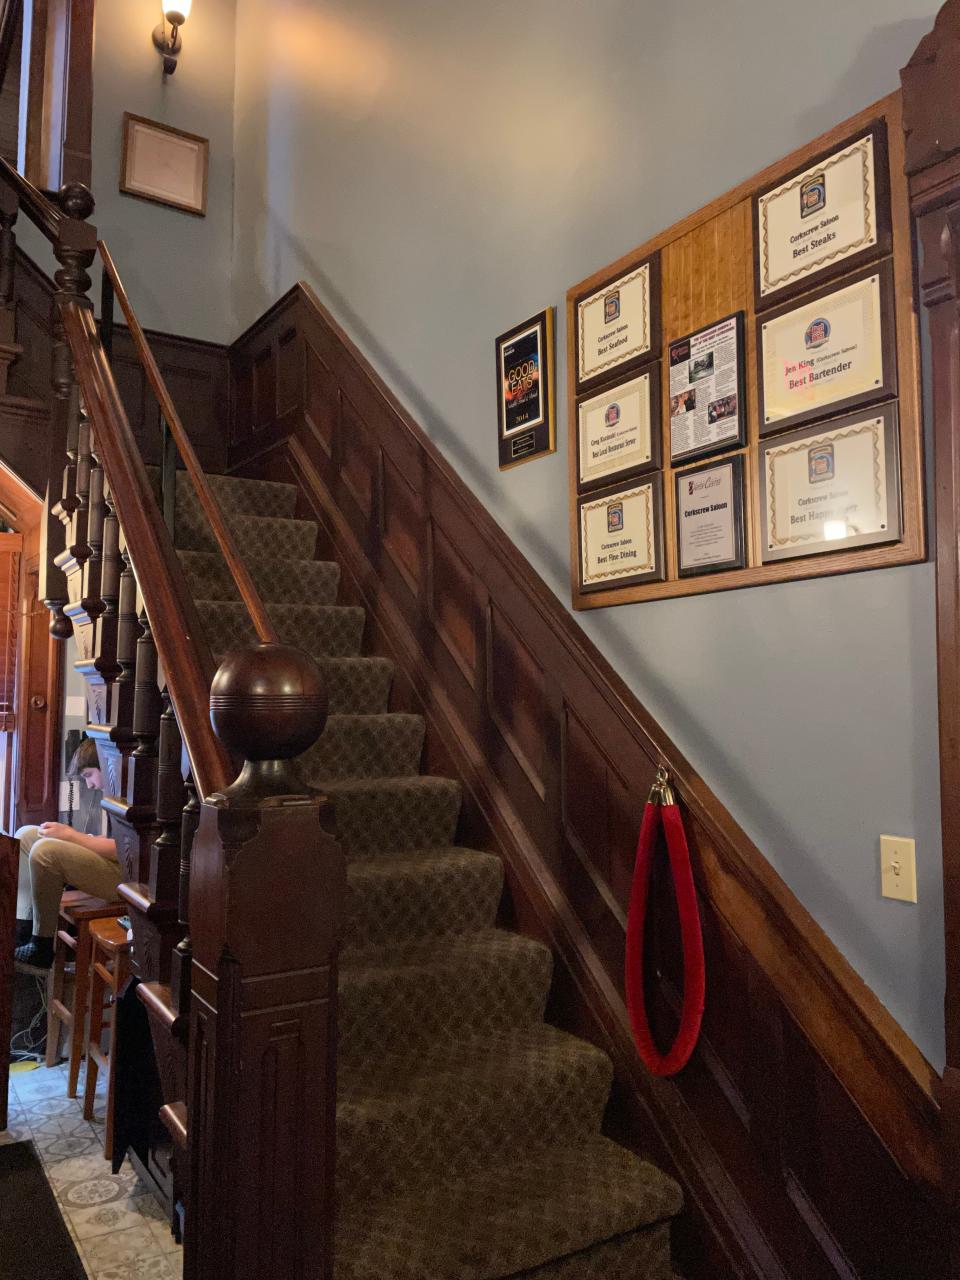 The grand staircase inside of the Corkscrew Saloon in Medina.